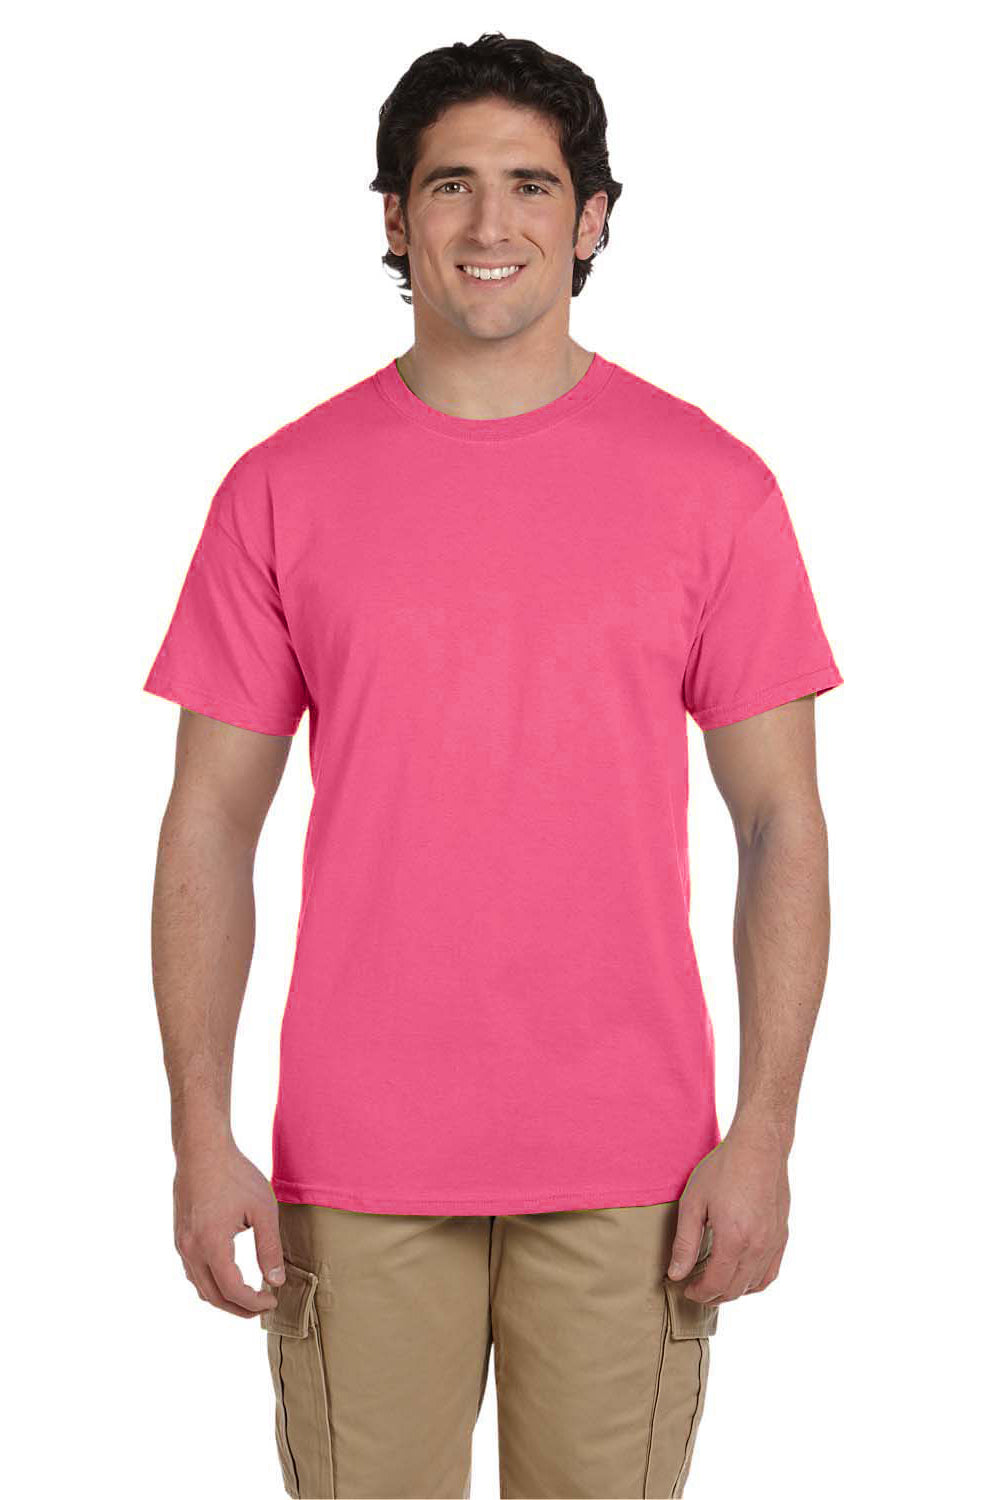 Fruit Of The Loom 3931 Mens HD Jersey Short Sleeve Crewneck T-Shirt Neon Pink Front